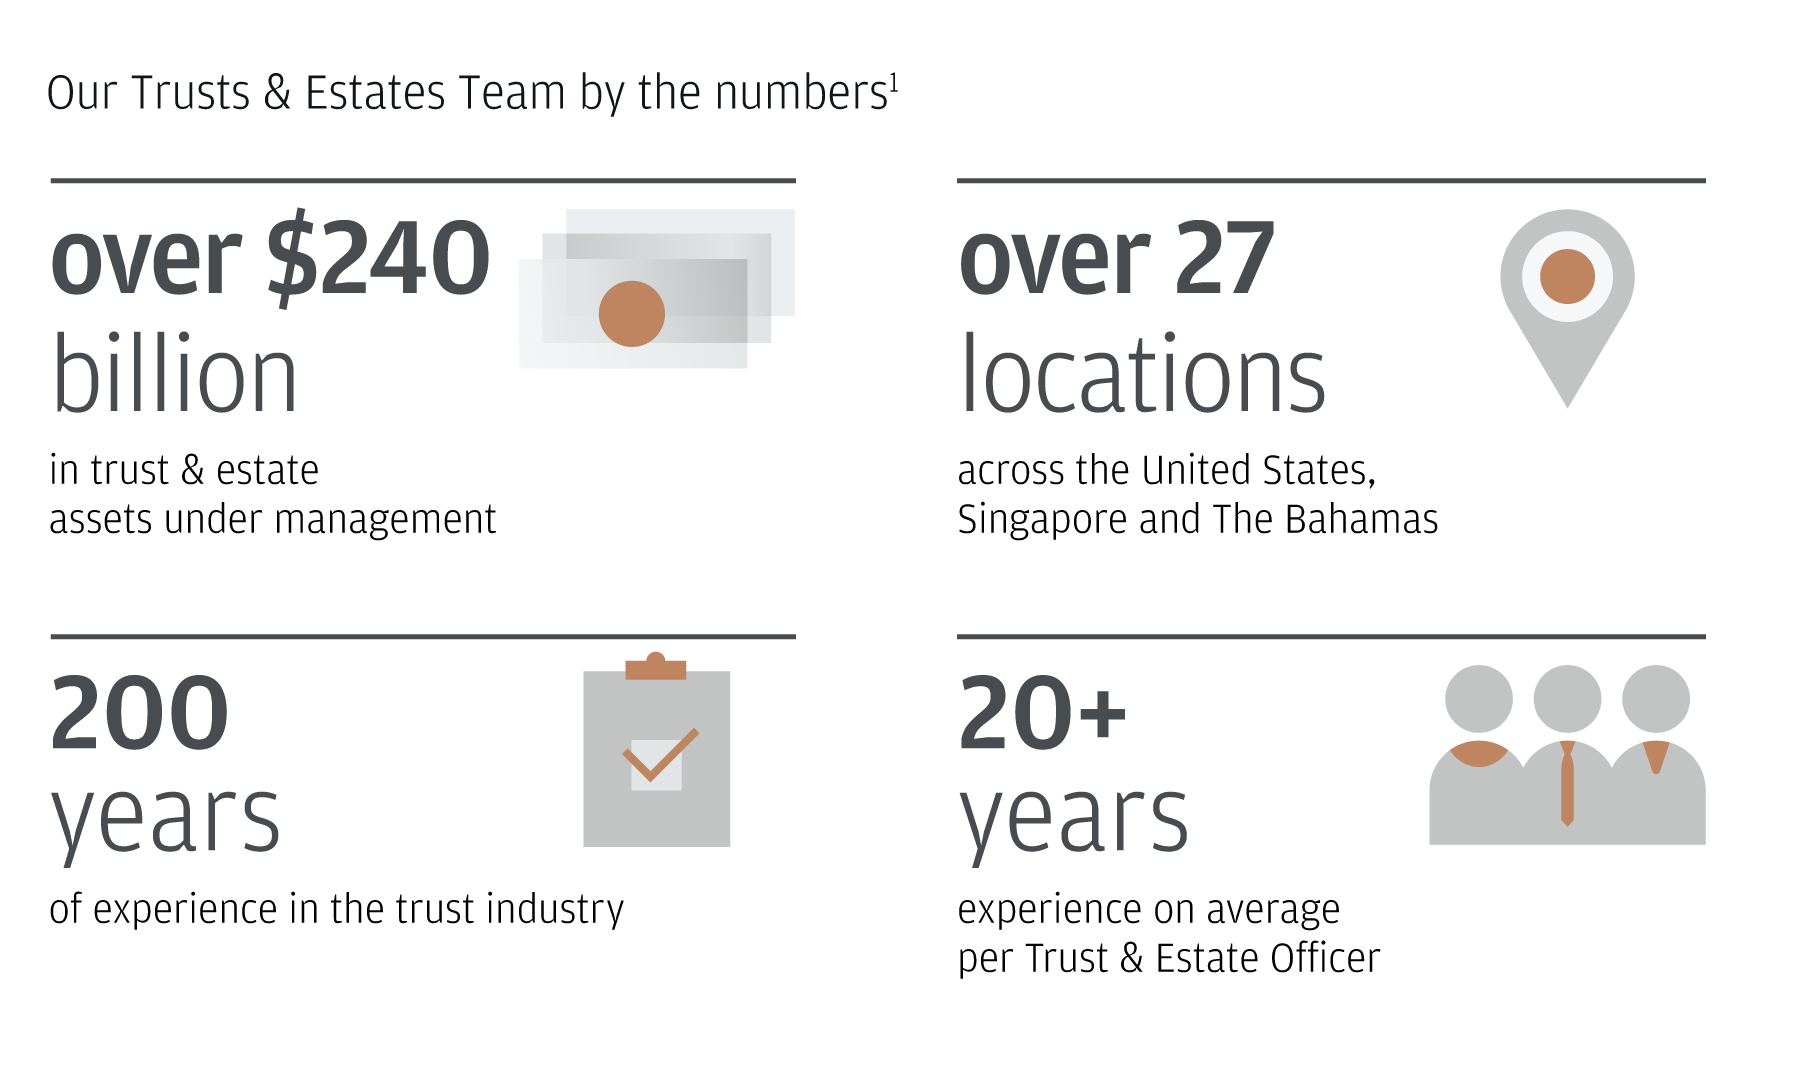 This chart includes a breakdown of our Trusts & Estates team by the numbers. We have $240 billion in trust and estate assets, 27 locations across the U.S., Singapore and The Bahamas, 200 years of experience in the trust industry and over 20 years of average experience per trust and estate officer. This data is approximated and as of November 2021